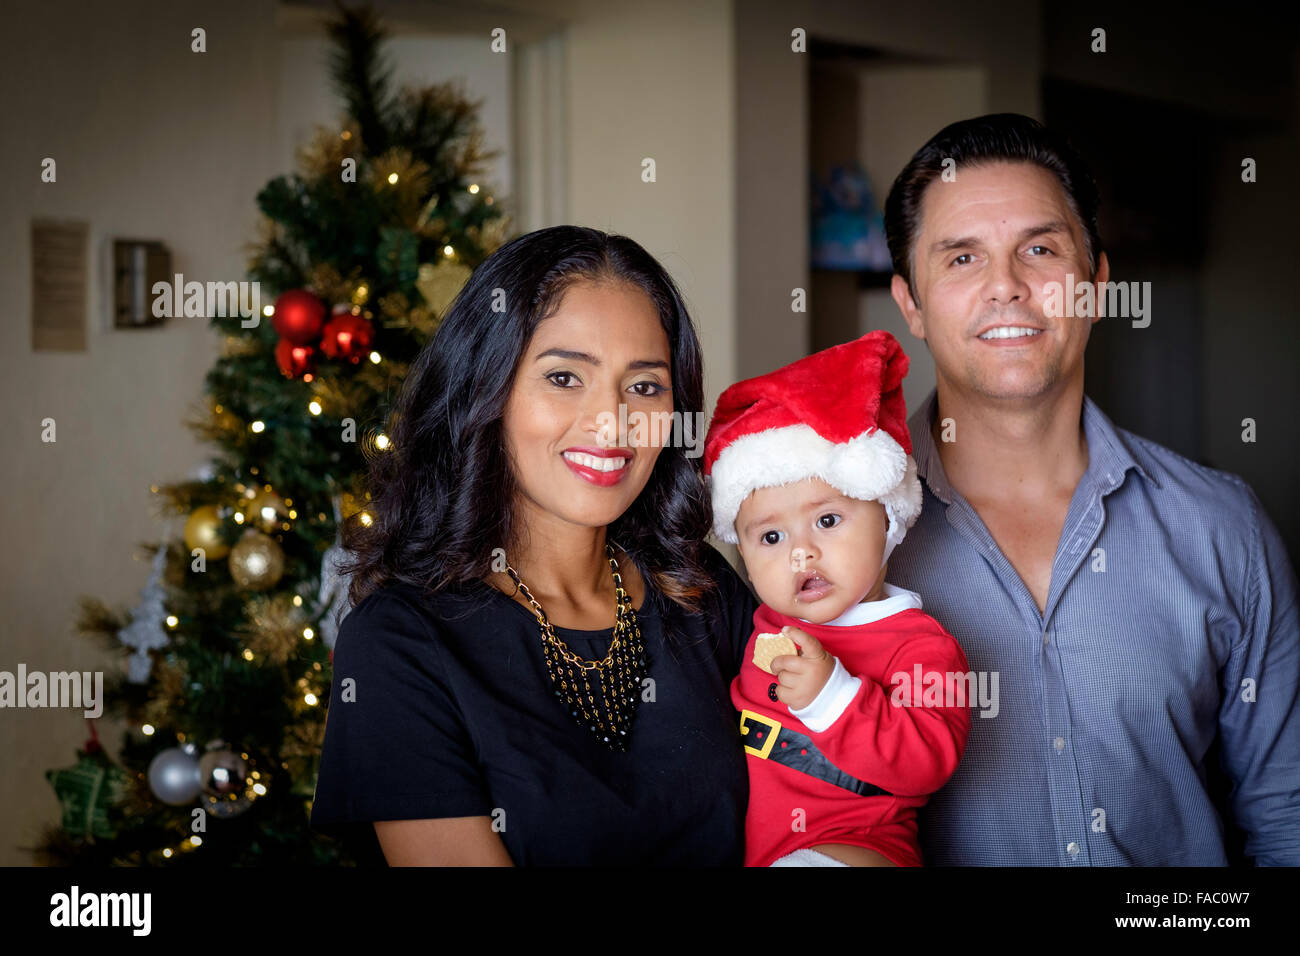 Christmas portrait of a multi-ethnic family. Mother is of hispanic, while father is of ccaucasian ethnicity. They're holding the Stock Photo